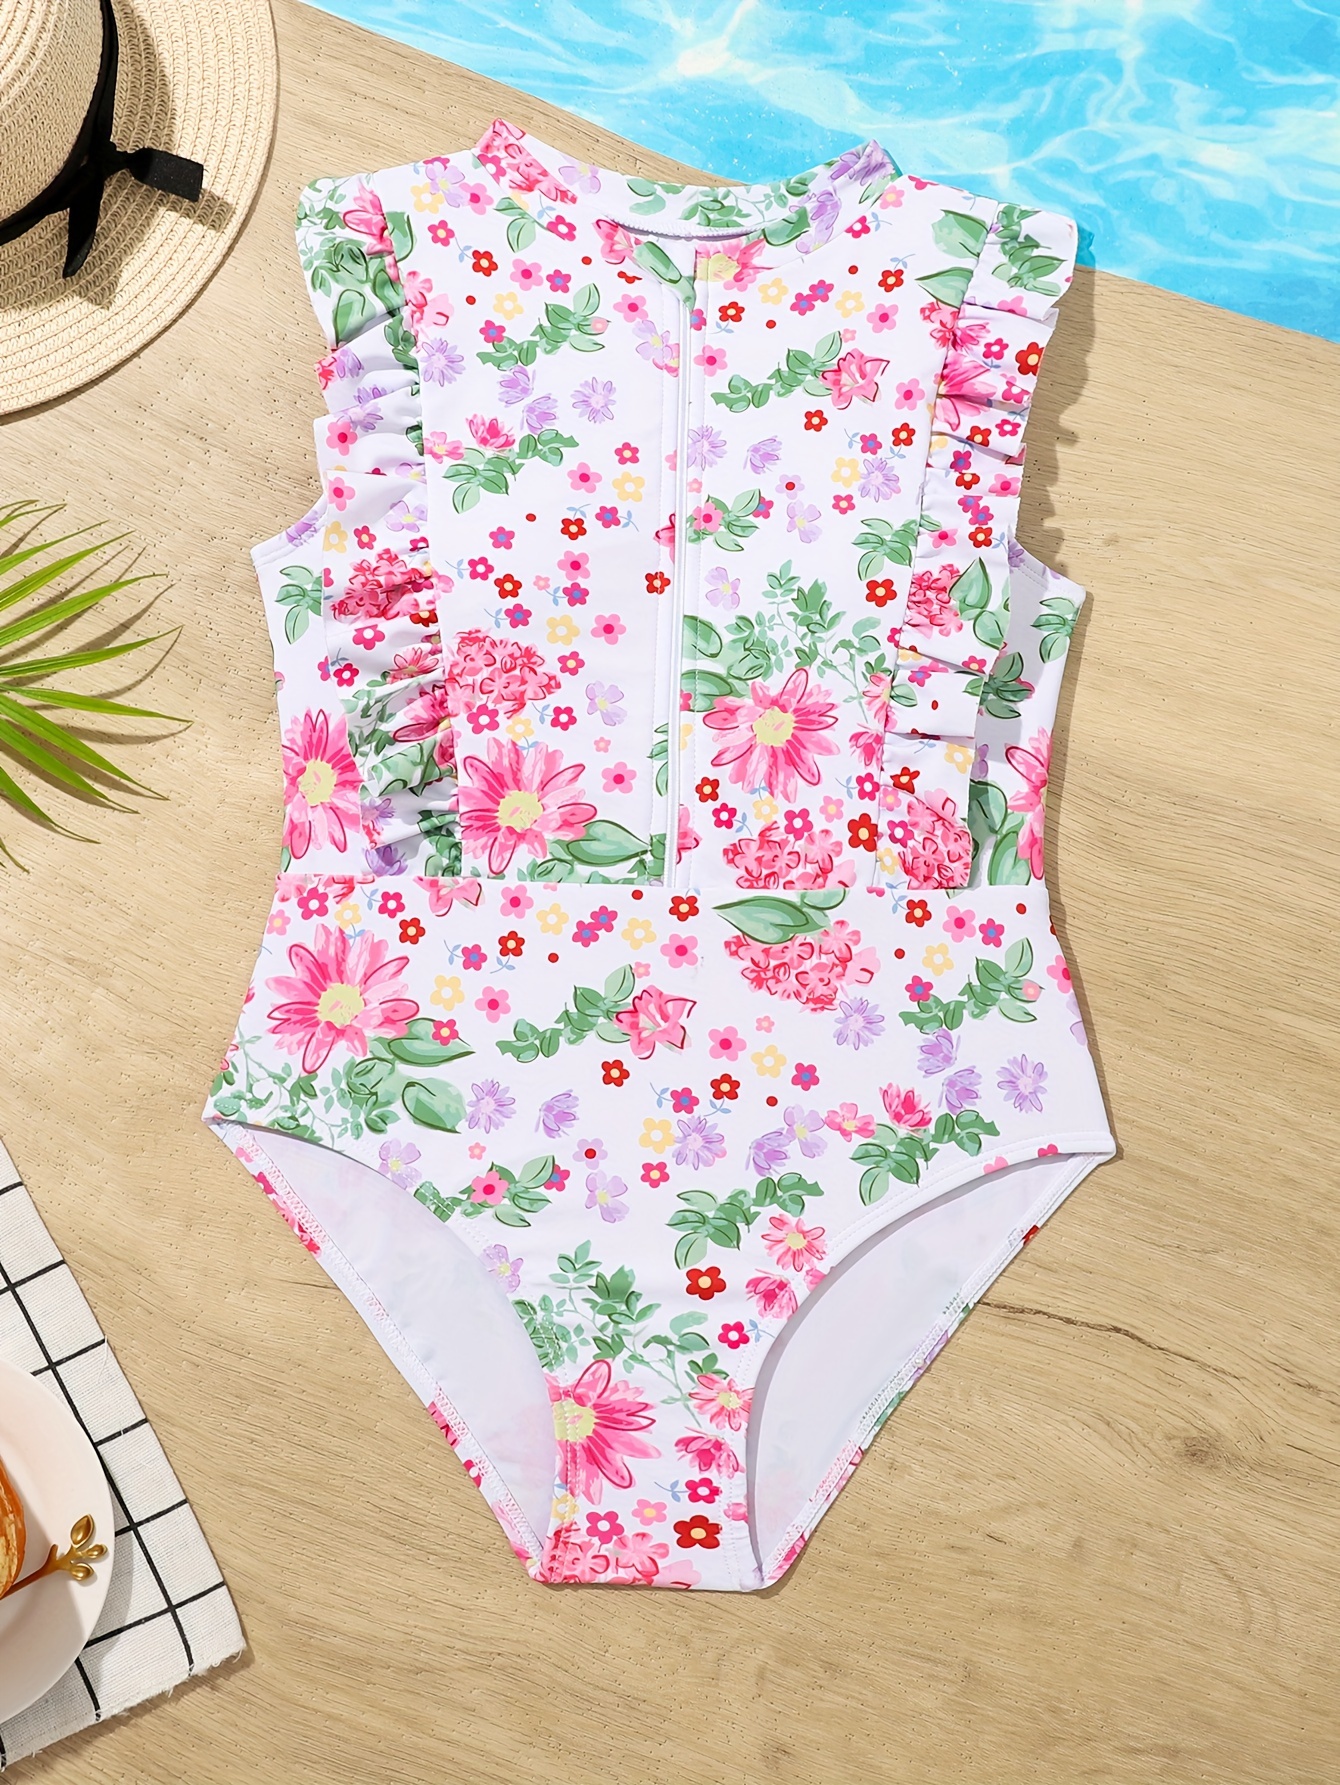 Floral One Piece Swimsuit For Baby Girls With Ruffled Design And